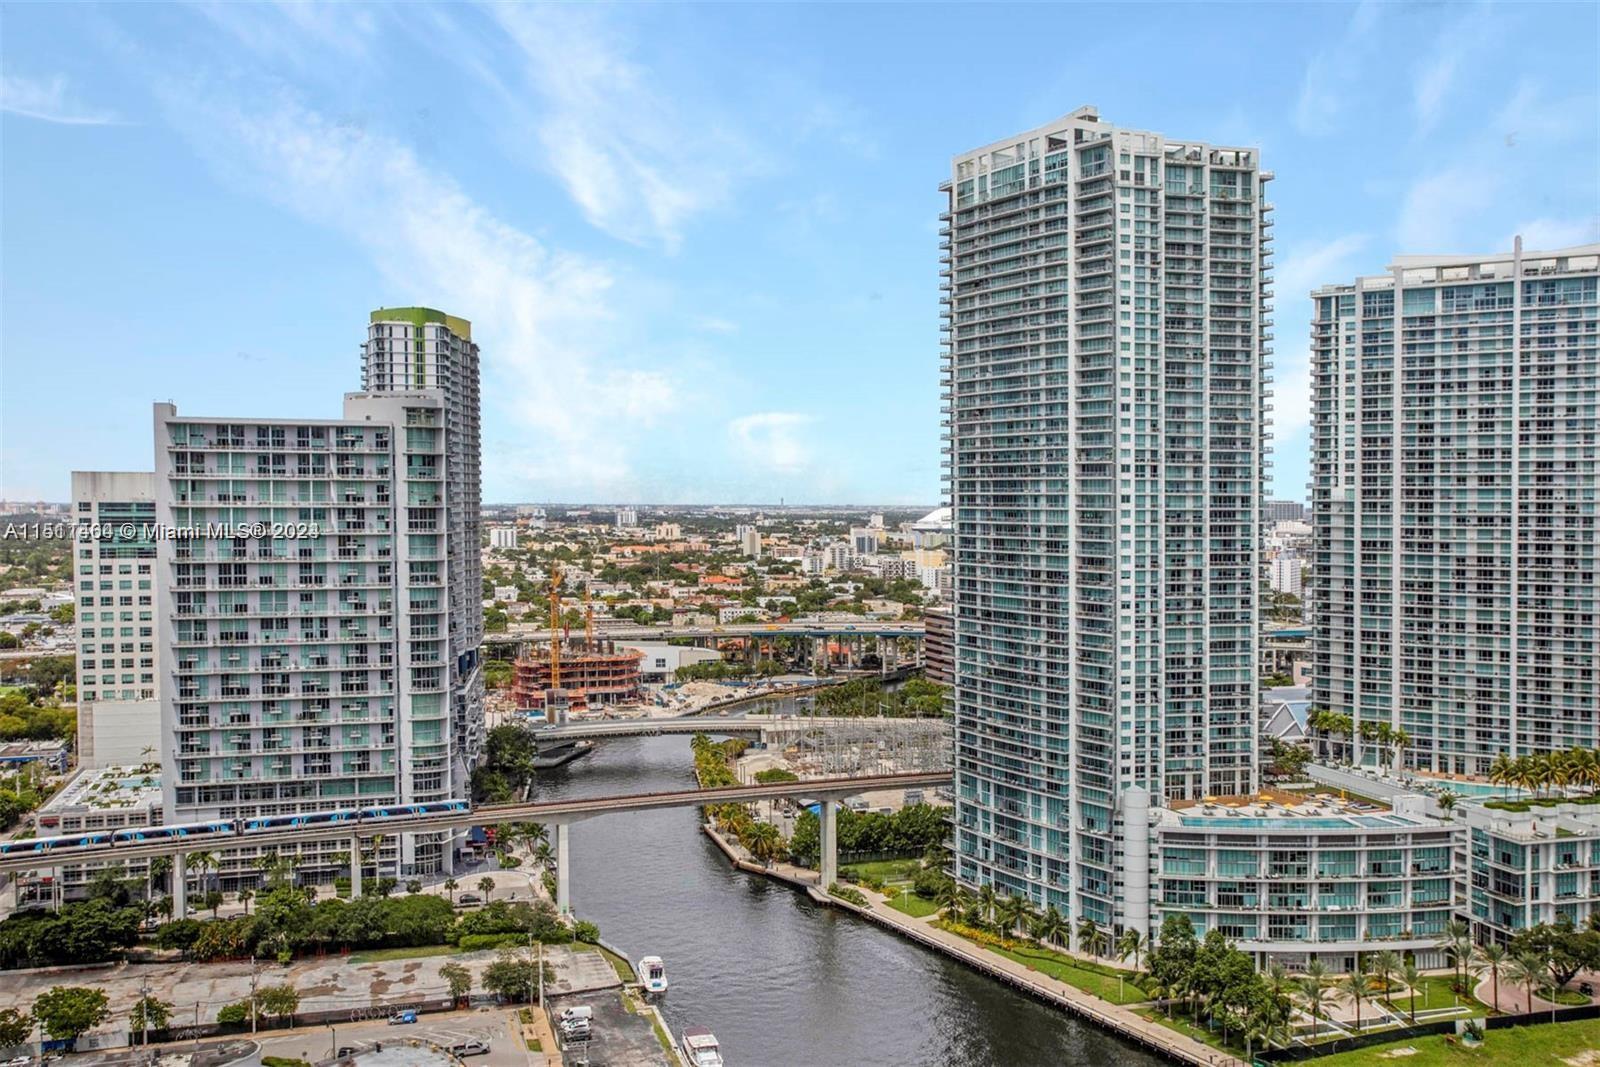 68 SE 6th St Unit 2412, Miami, Florida, 33131, United States, 2 Bedrooms Bedrooms, ,3 BathroomsBathrooms,Residential,For Sale,68 SE 6th St Unit 2412,1445855